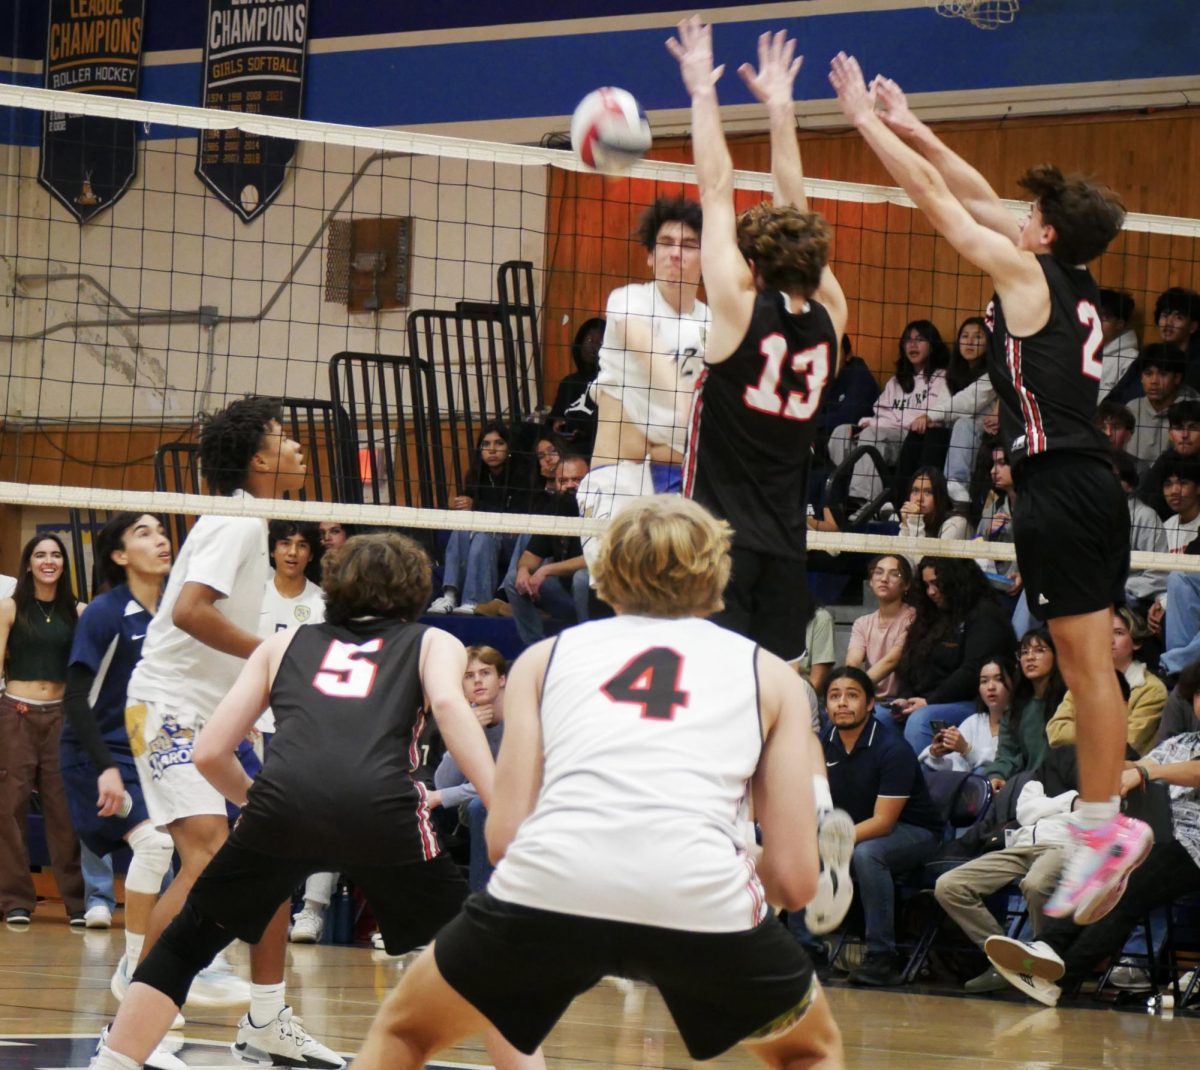 On Feb. 23, the Bonita Vista High (BVH) Barons boys varsity volleyball team faced the Canyon Hills High (CHH) Rattlers in a tournament matchup. Midway through the first set, BVH spikes the ball in the hopes of scoring another point against CHH.